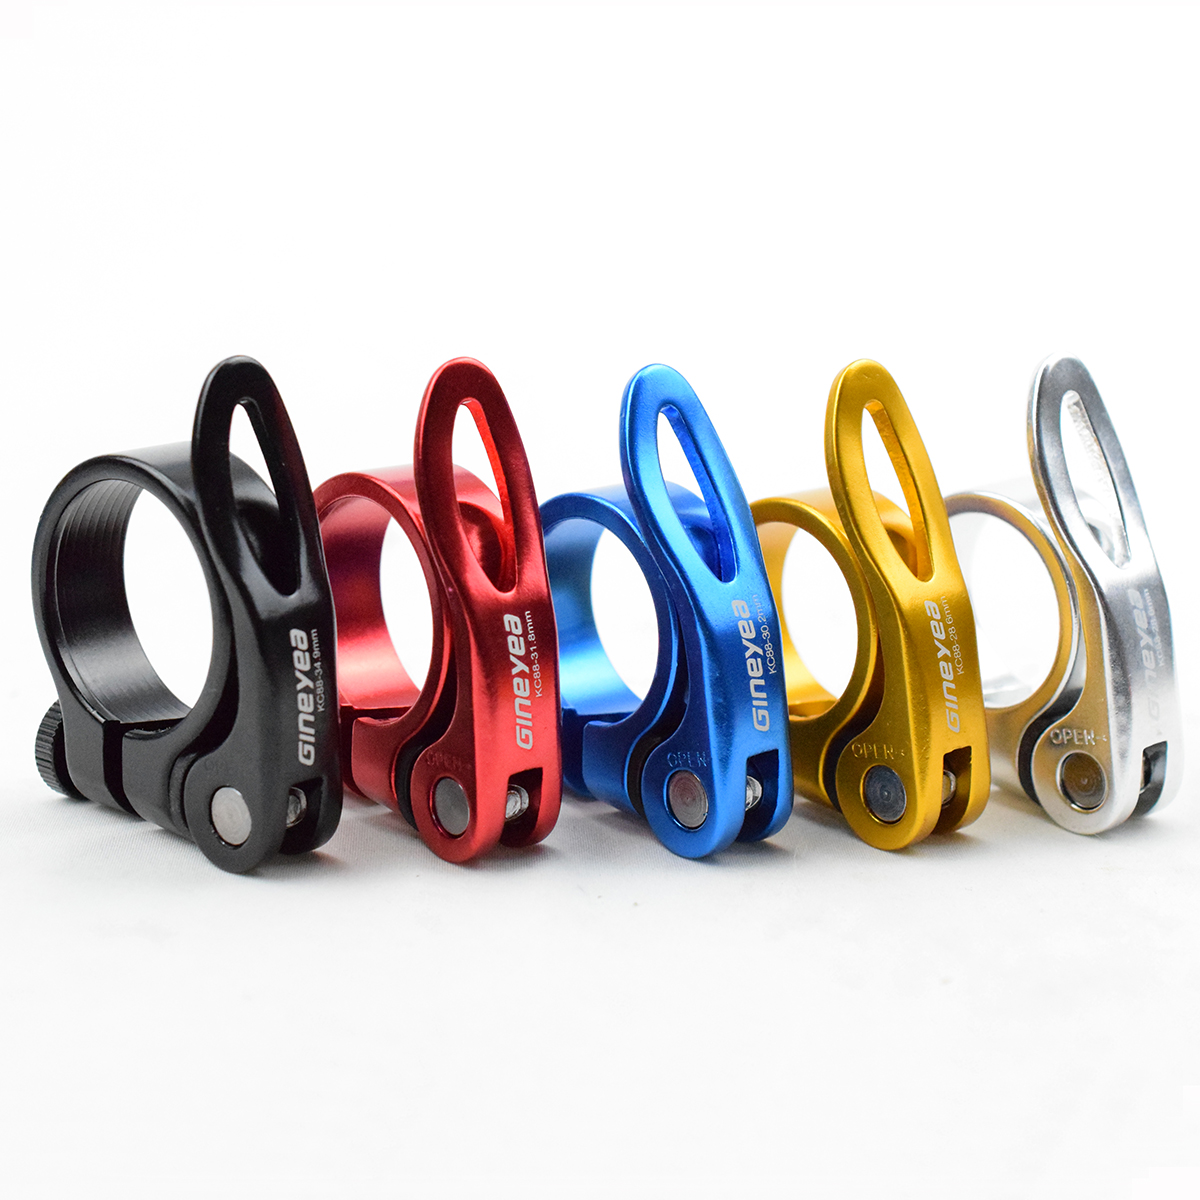 

Quick Release Seat Clamp Alloy QR Bike Saddle Tube Clamps 28.6/30.2/31.8/34.9mm Road MTB Bicycle Seatpost Clamp